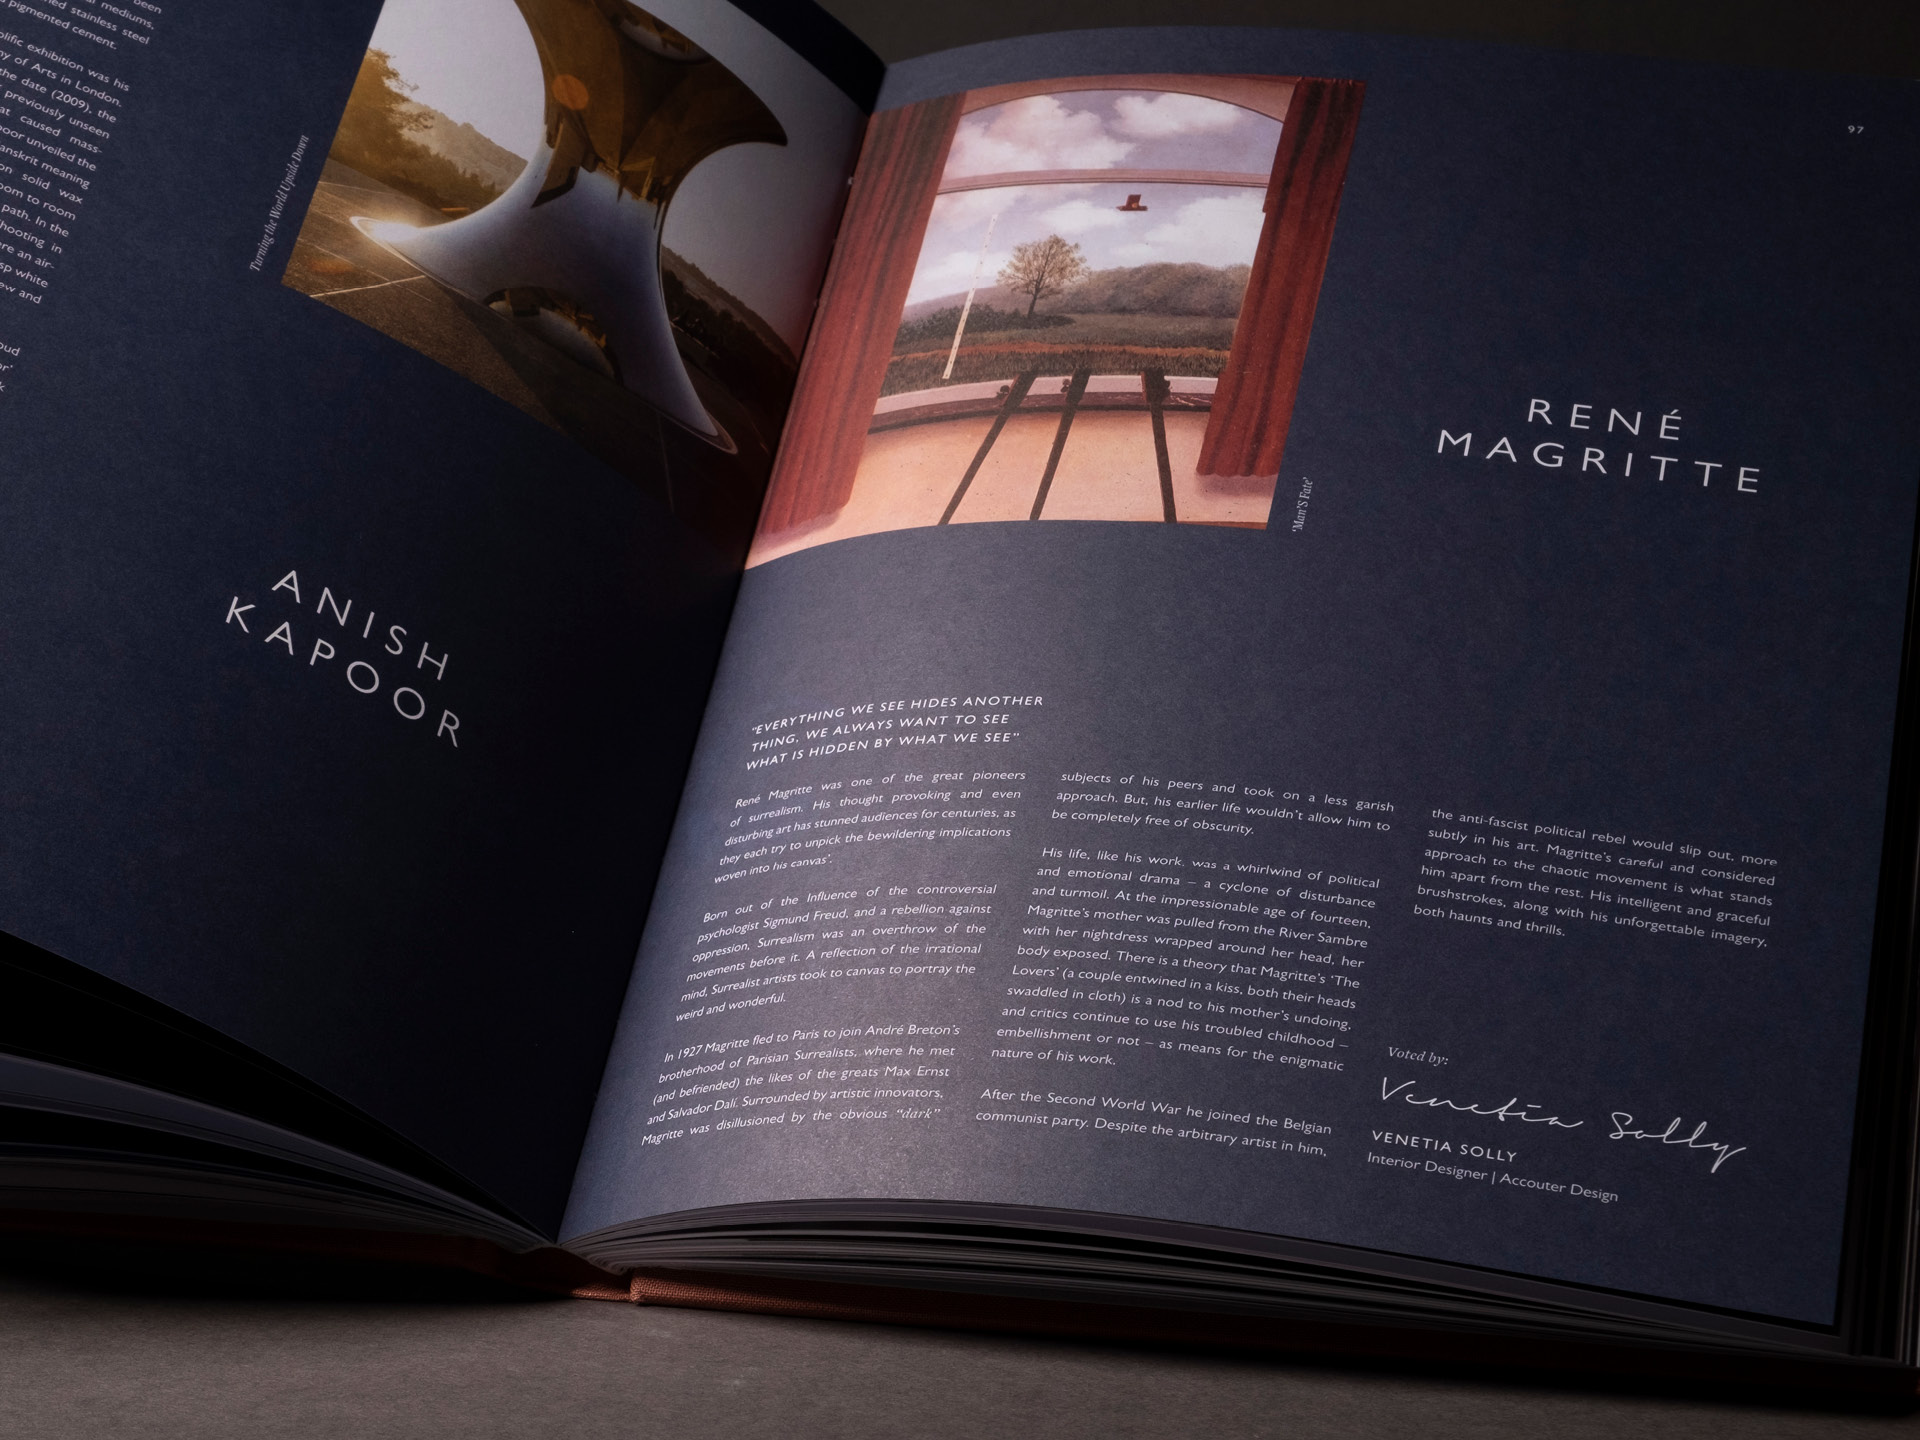 Printed spread from the Accouter Four annual featuring artists Anish Kapoor and René Magritte